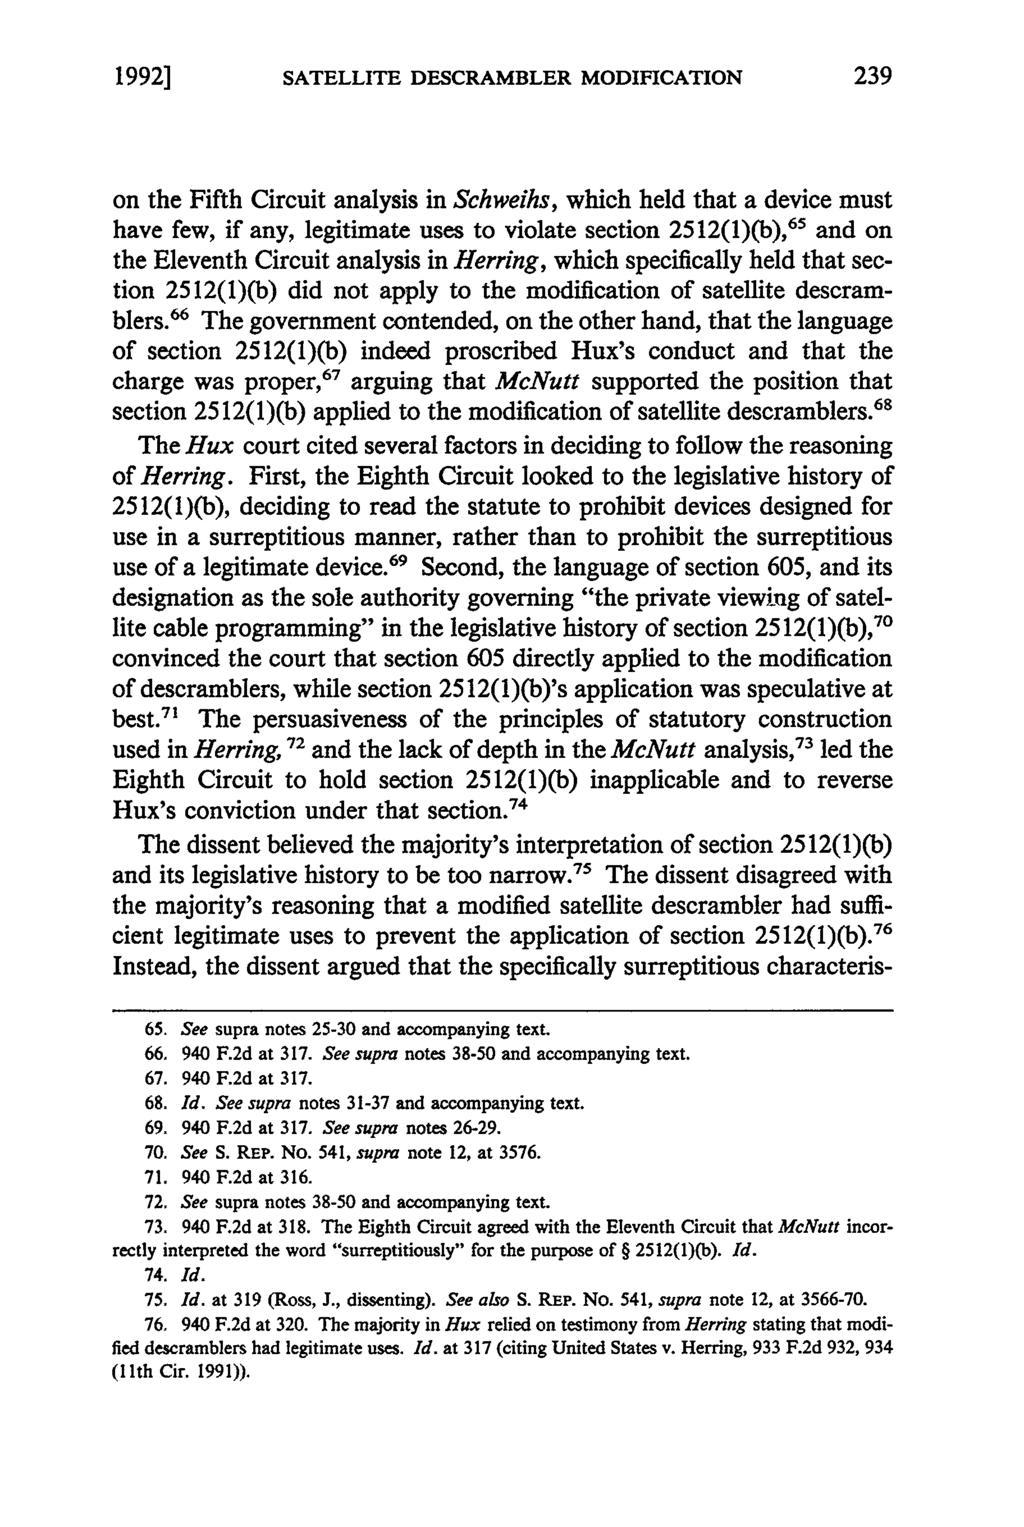 19921 SATELLITE DESCRAMBLER MODIFICATION on the Fifth Circuit analysis in Schweihs, which held that a device must have few, if any, legitimate uses to violate section 2512(1)(b), 65 and on the